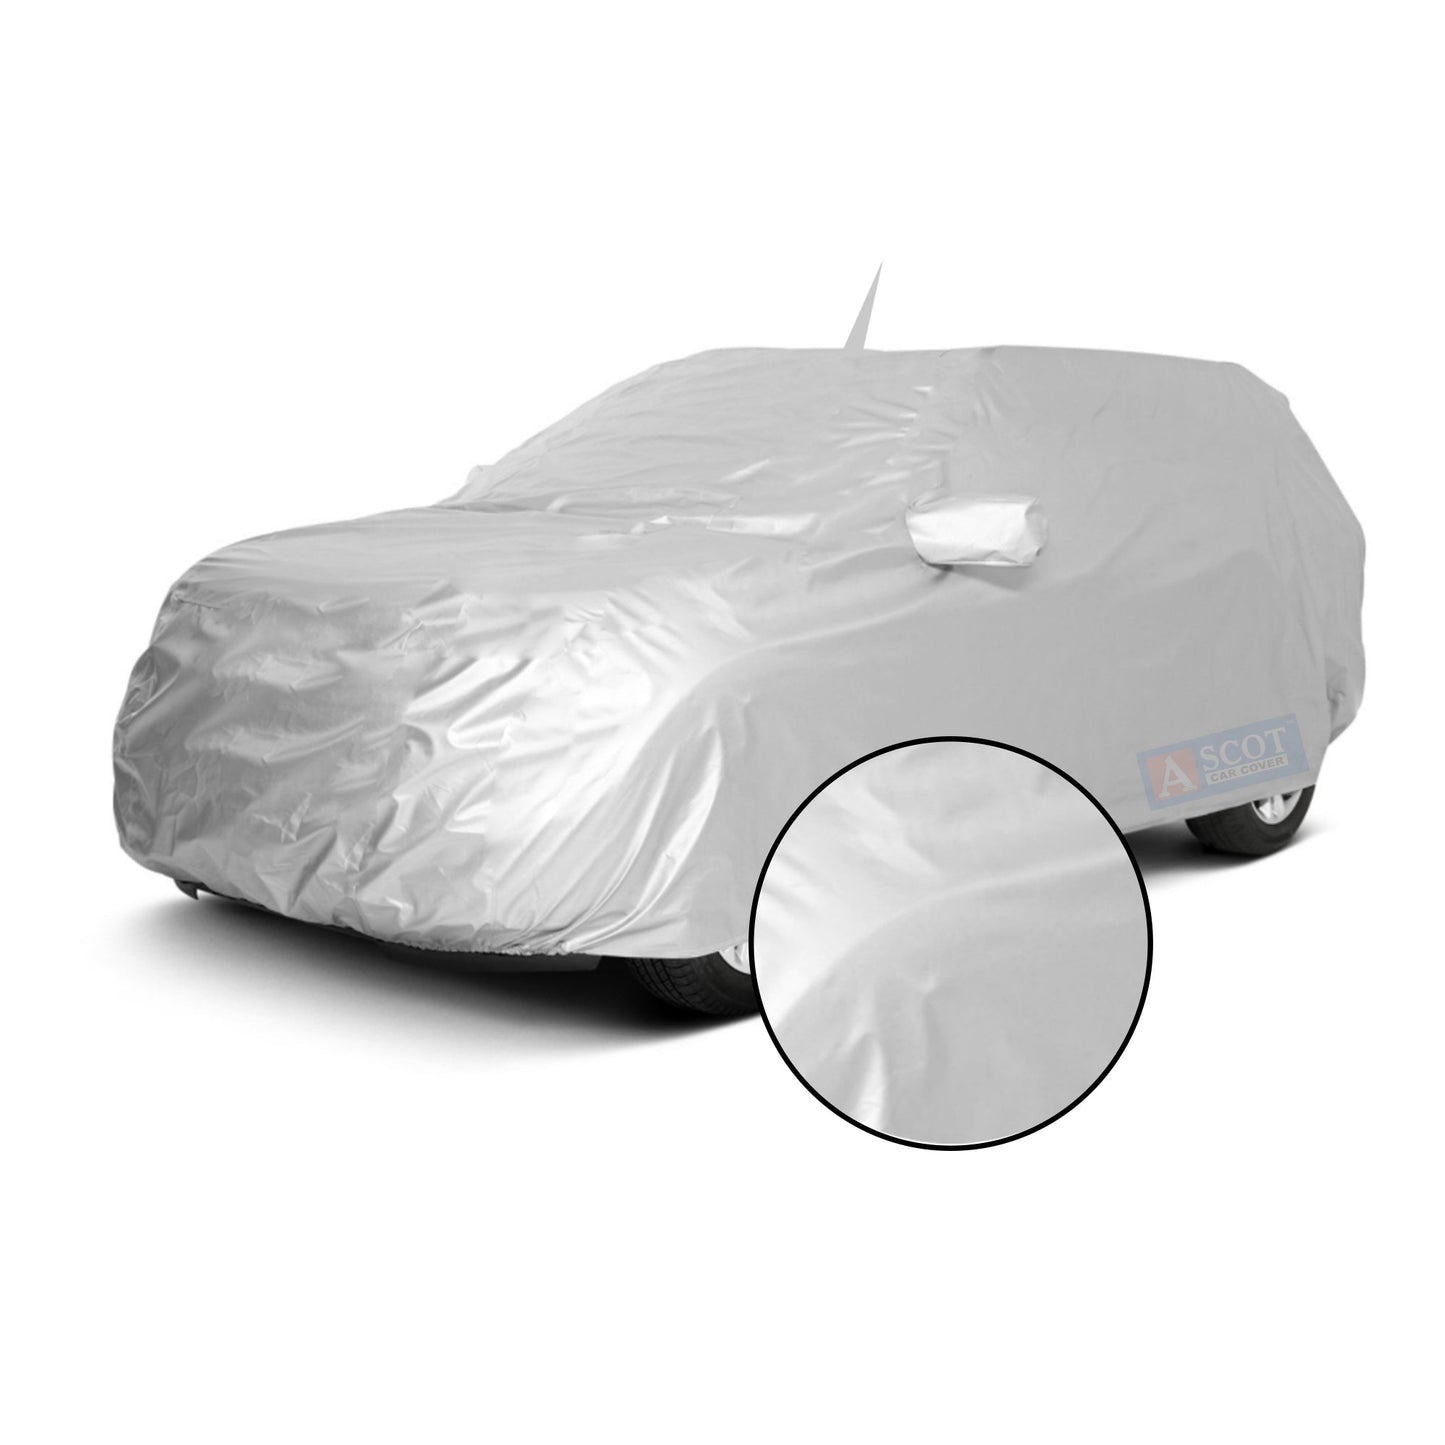 Ascot Renault Duster Car Body Cover Dust Proof, Trippel Stitched